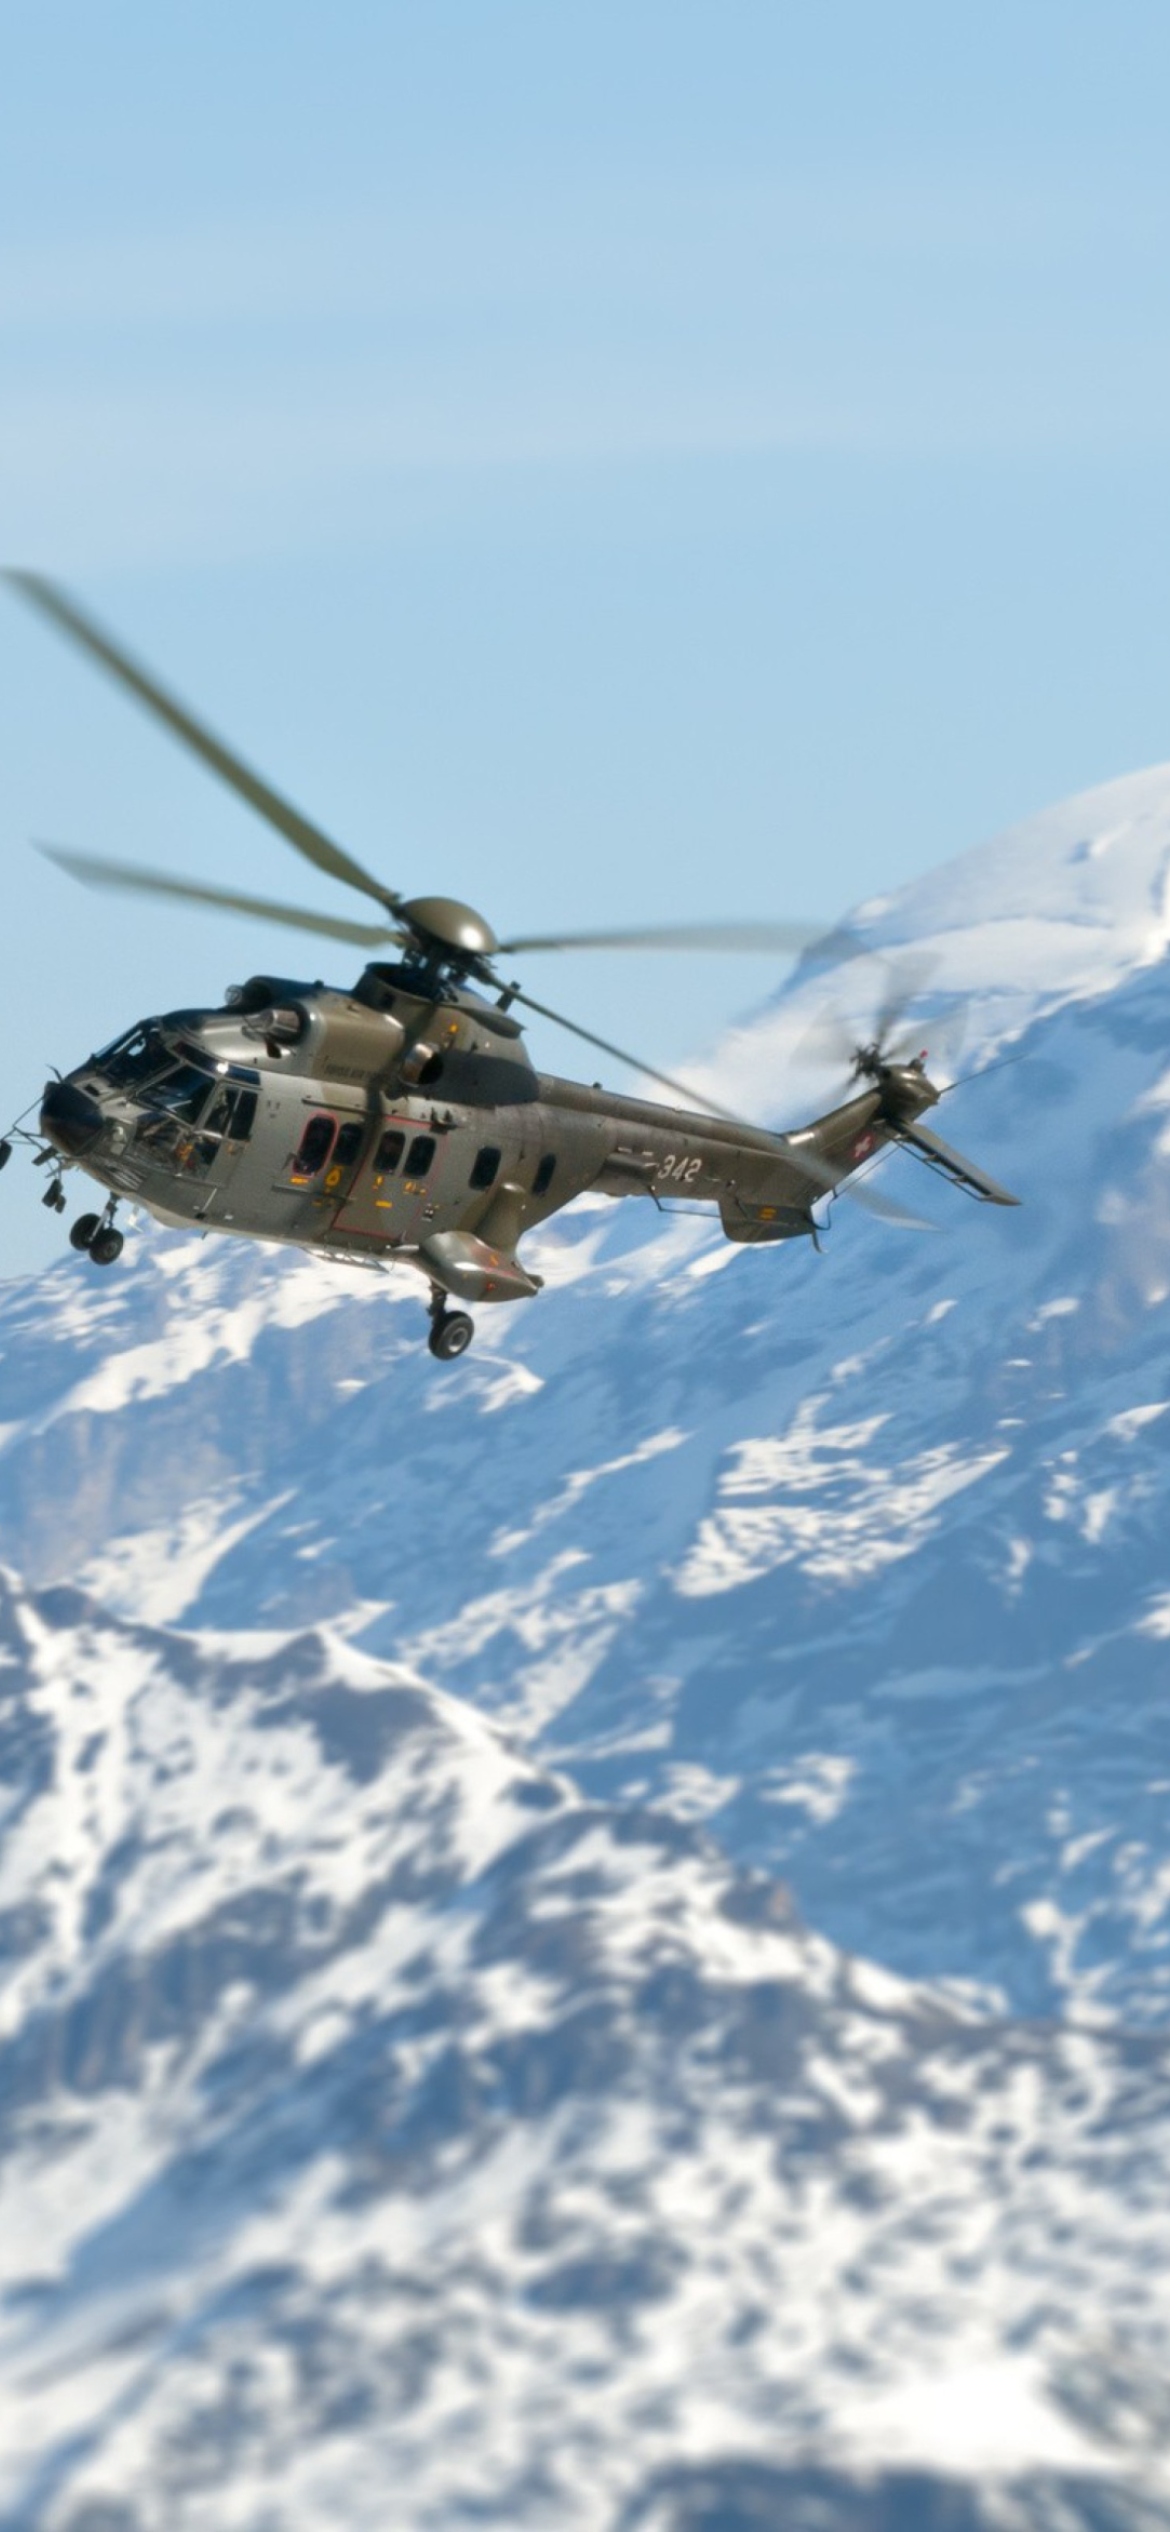 Helicopter Over Snowy Mountains wallpaper 1170x2532